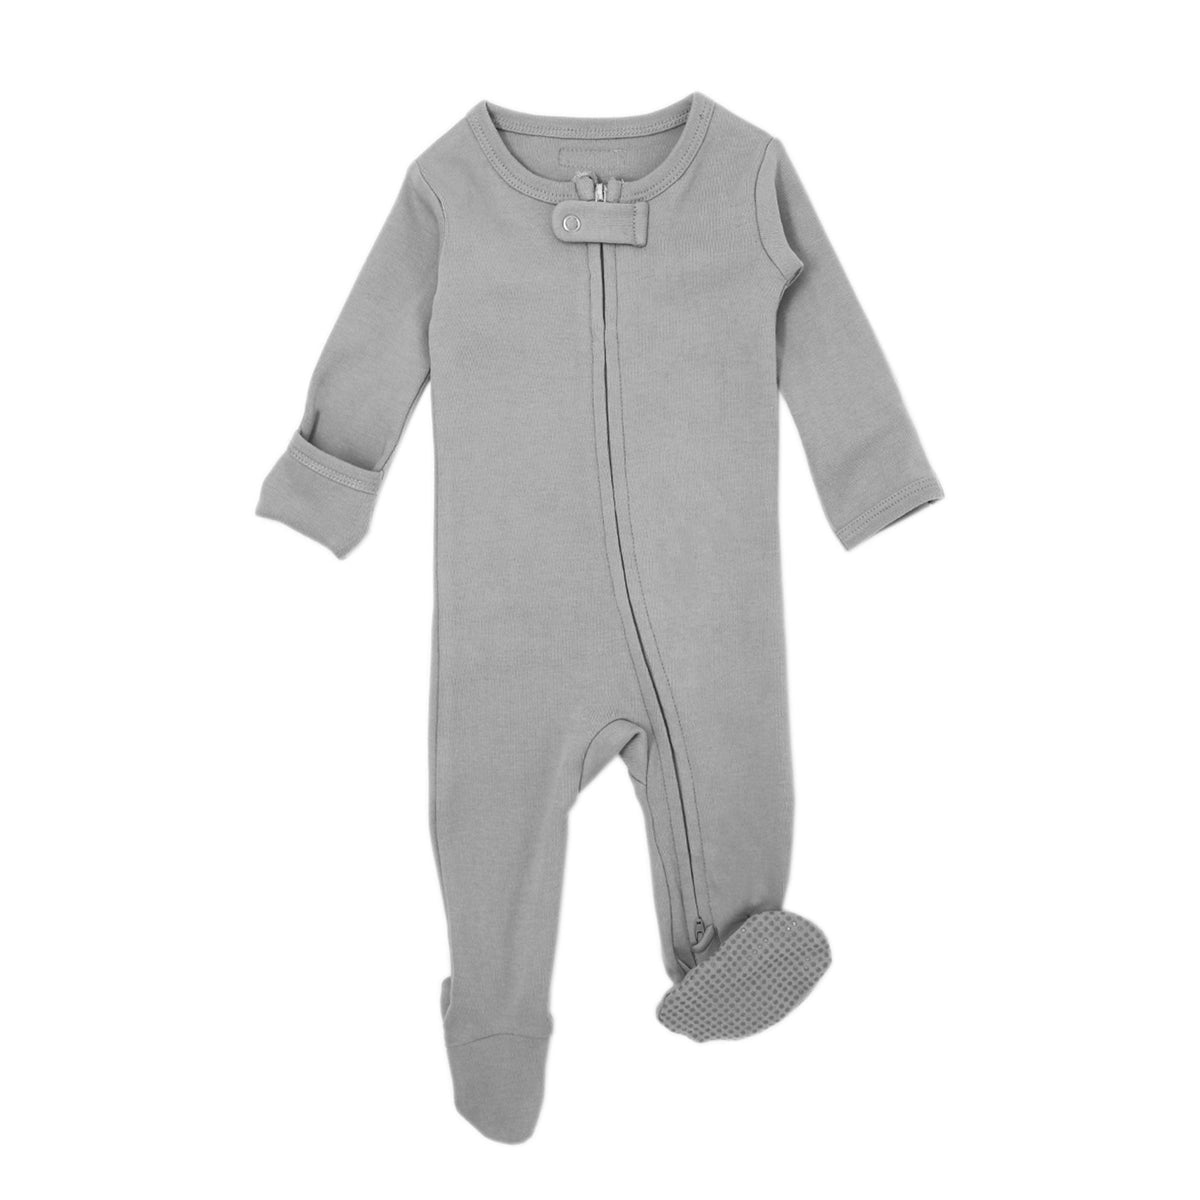 L'ovedbaby Gl'oved-Sleeve Organic Jumpsuit / Footie - Reversed Zipper / Light Gray